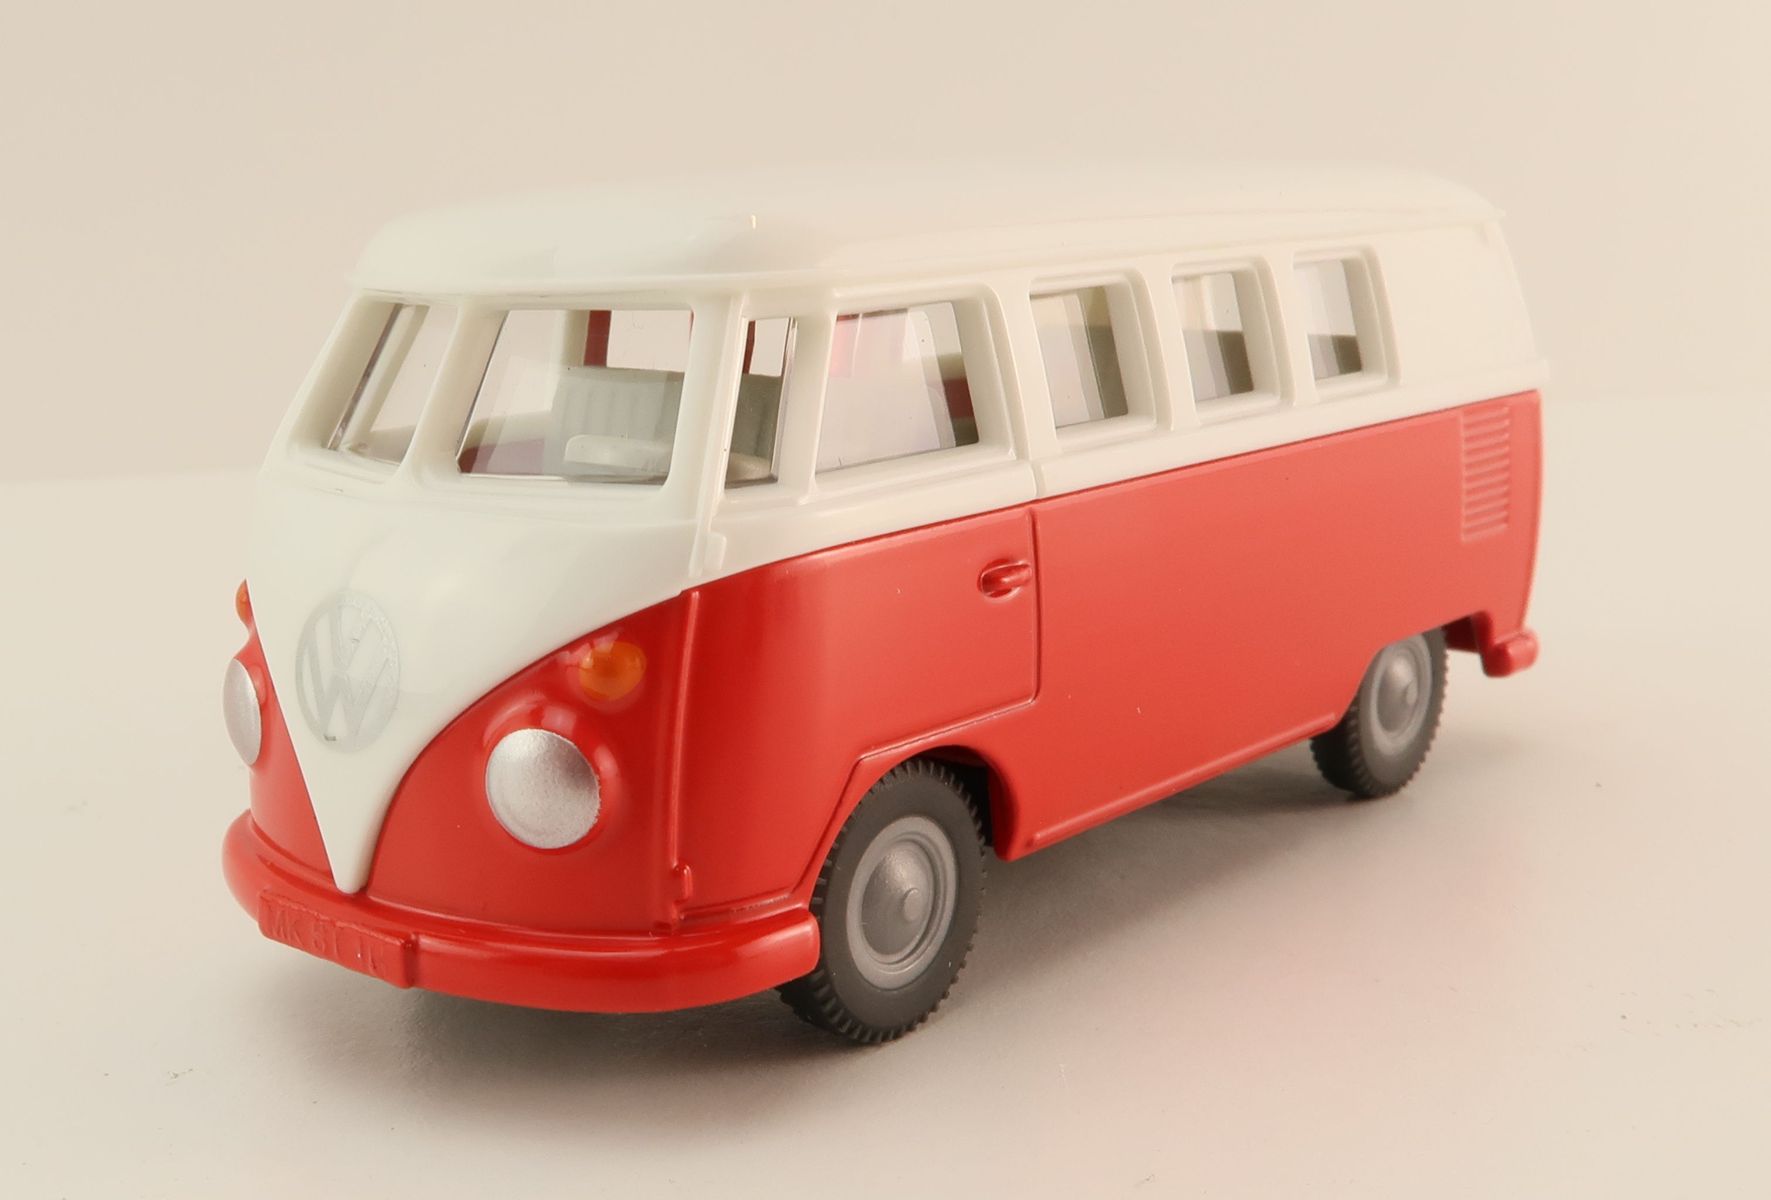 Product Image - Siku 2361 - Volkswagen VW T1 Transporter Bus White Red - Scale 1:50